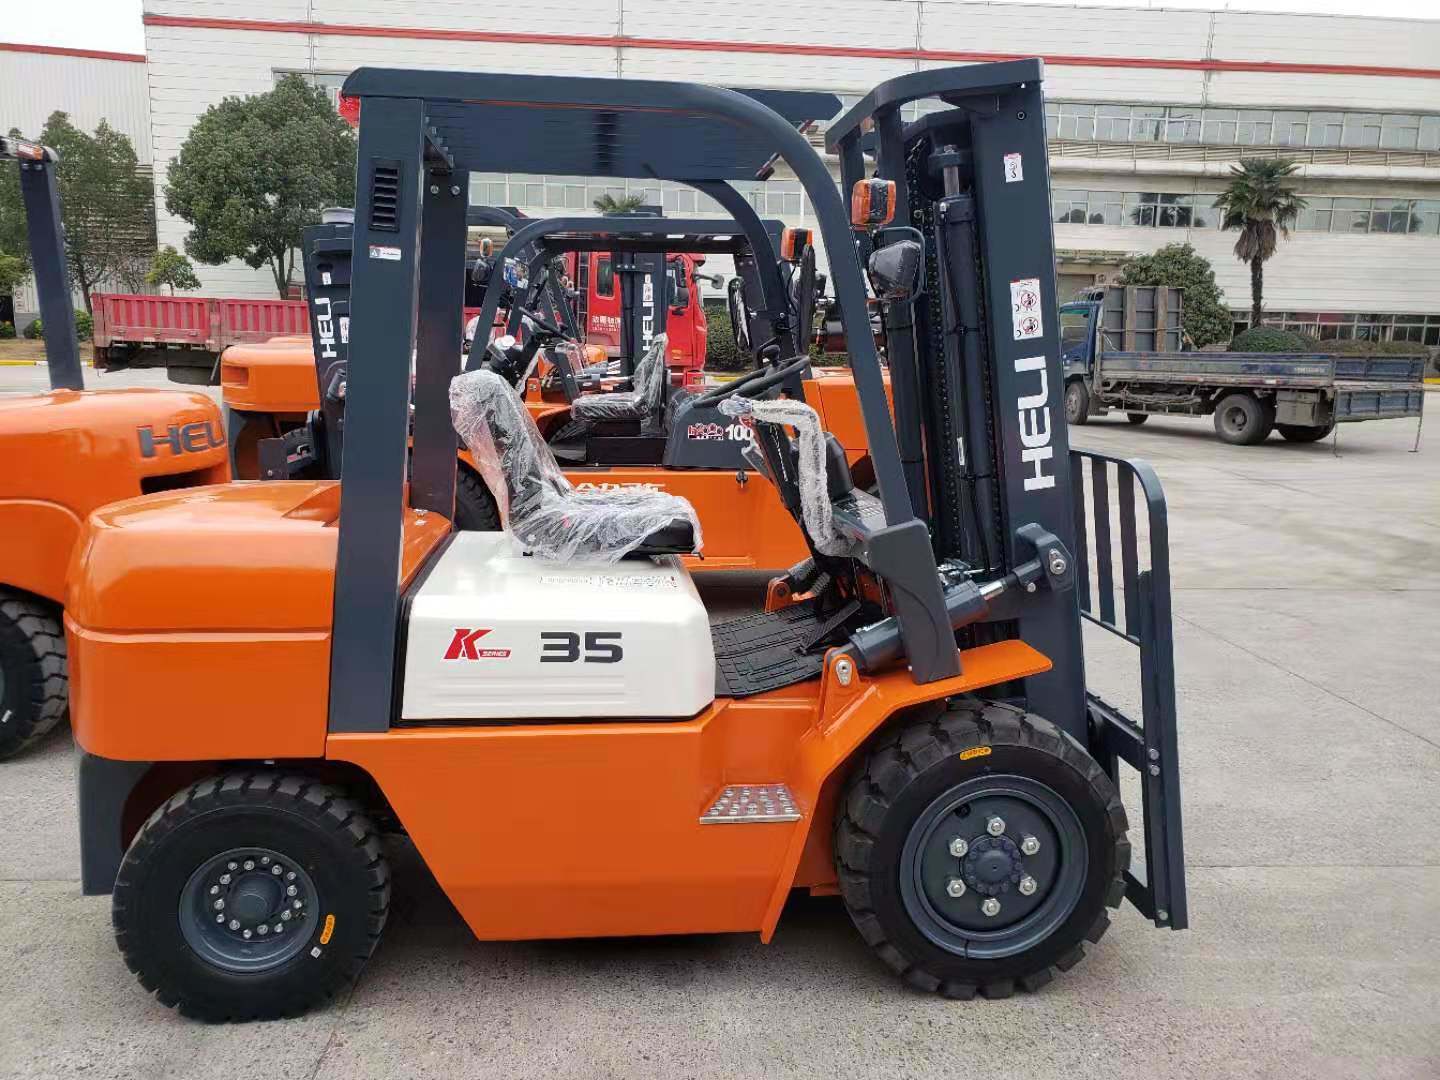 Heli 3.5t Rough Terrain Forklift Cpcd35 with Good Price Now